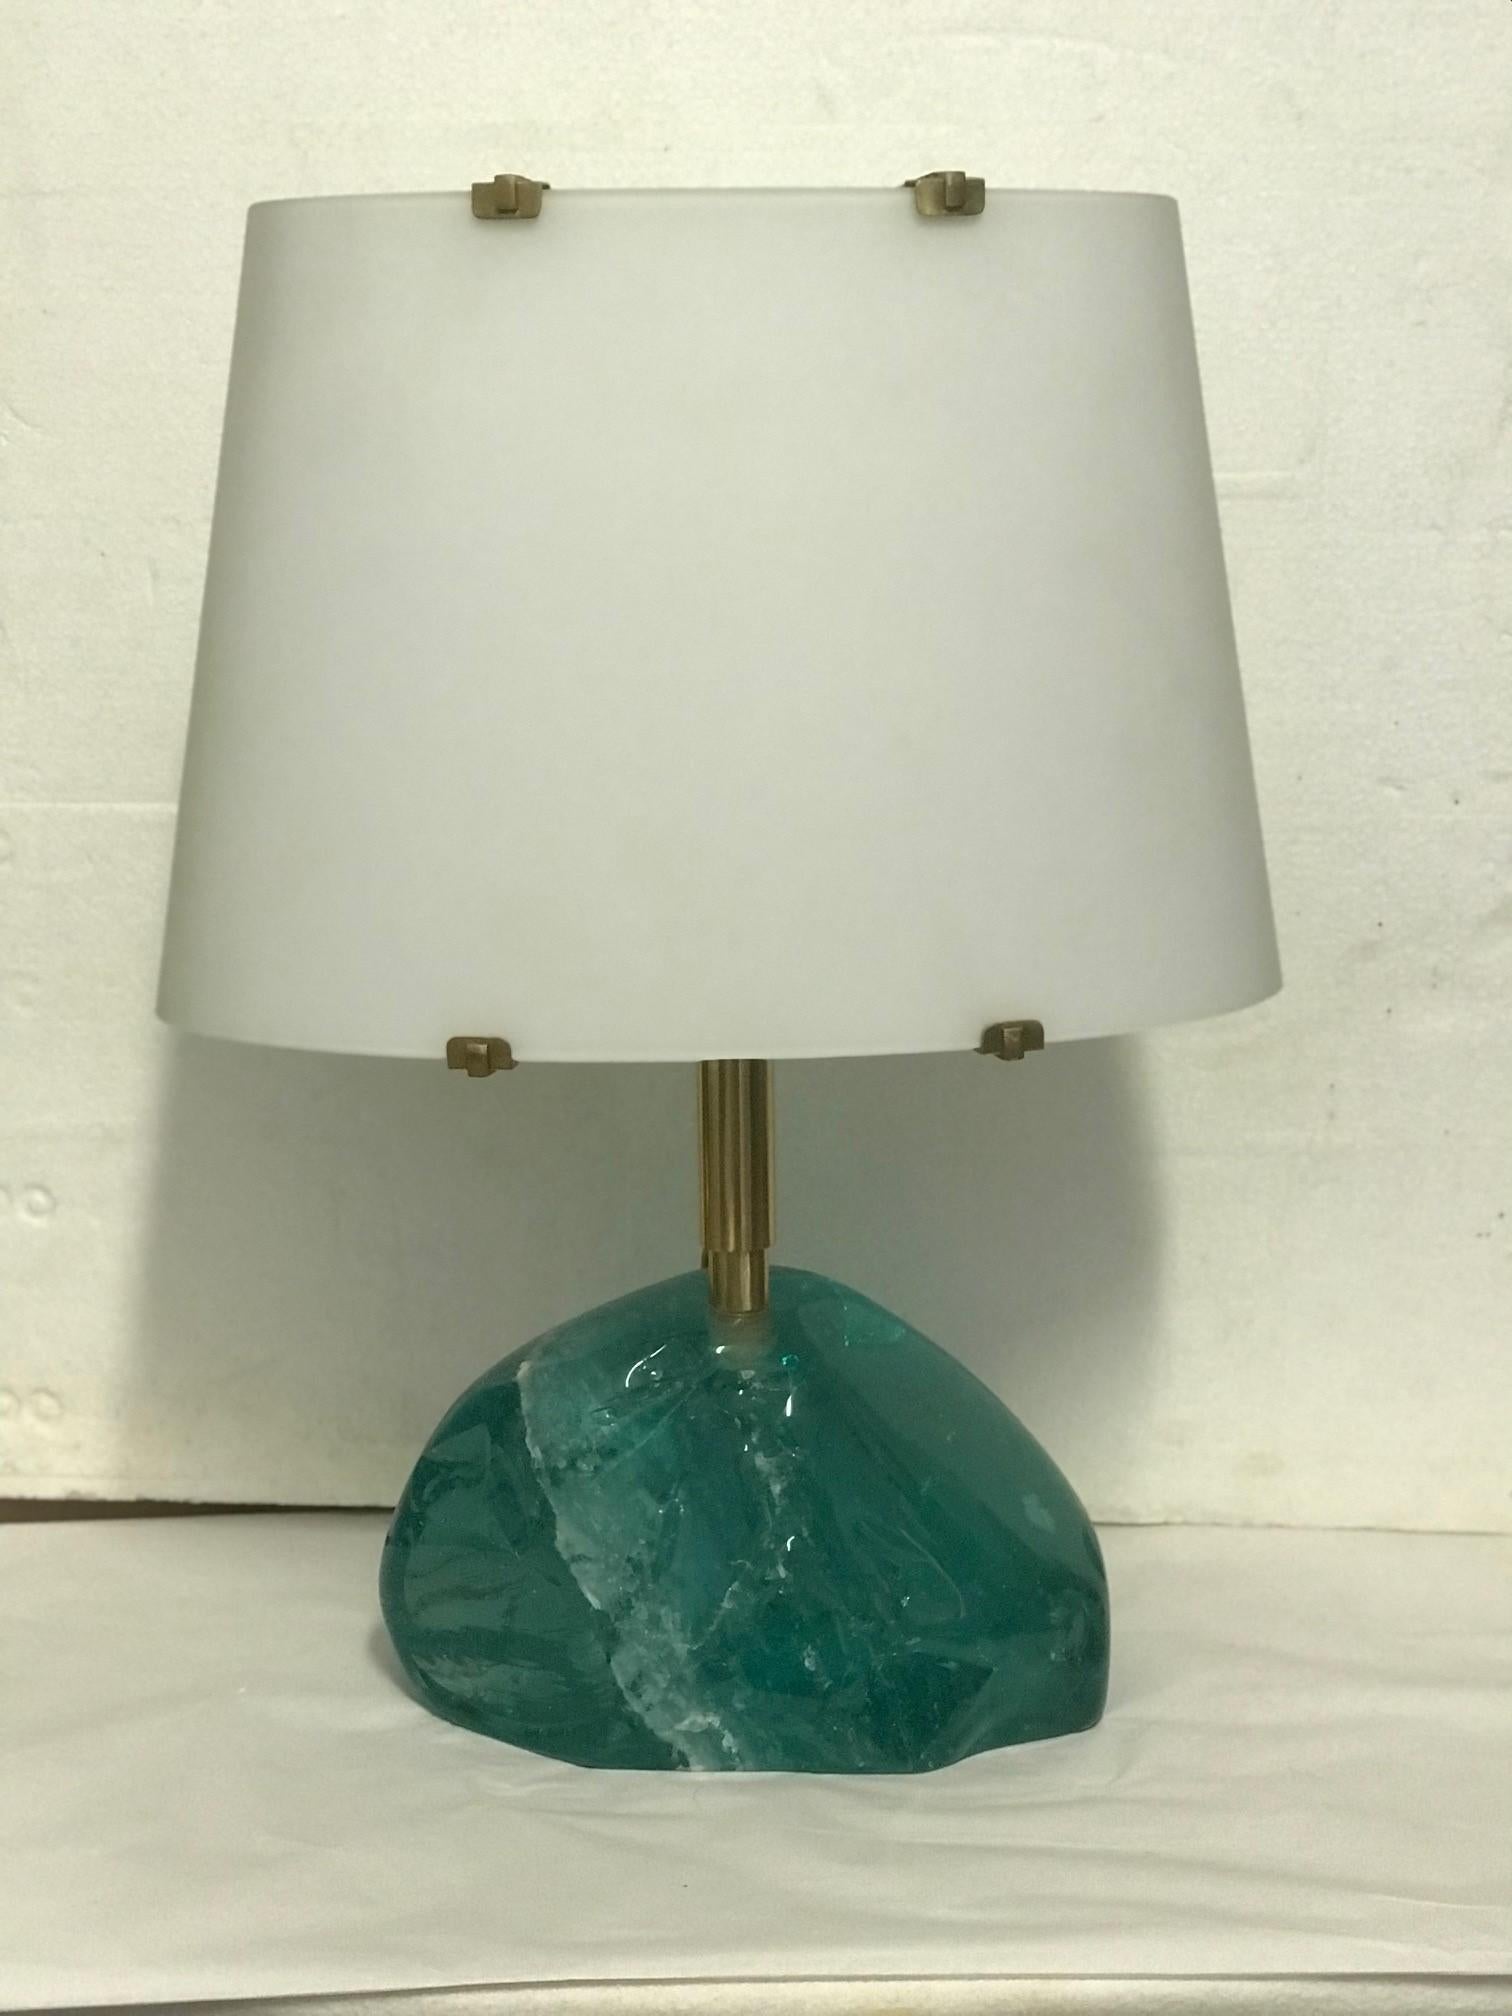 Lamp by Roberto Giulio Rida ROCCIA PICCOLA

Single table lamp made entirely by hand in Italy.
This lamp by Roberto Giulio Rida is constructed from a hand-ground crystal base into which is inserted the brass structure that supports the shade and on